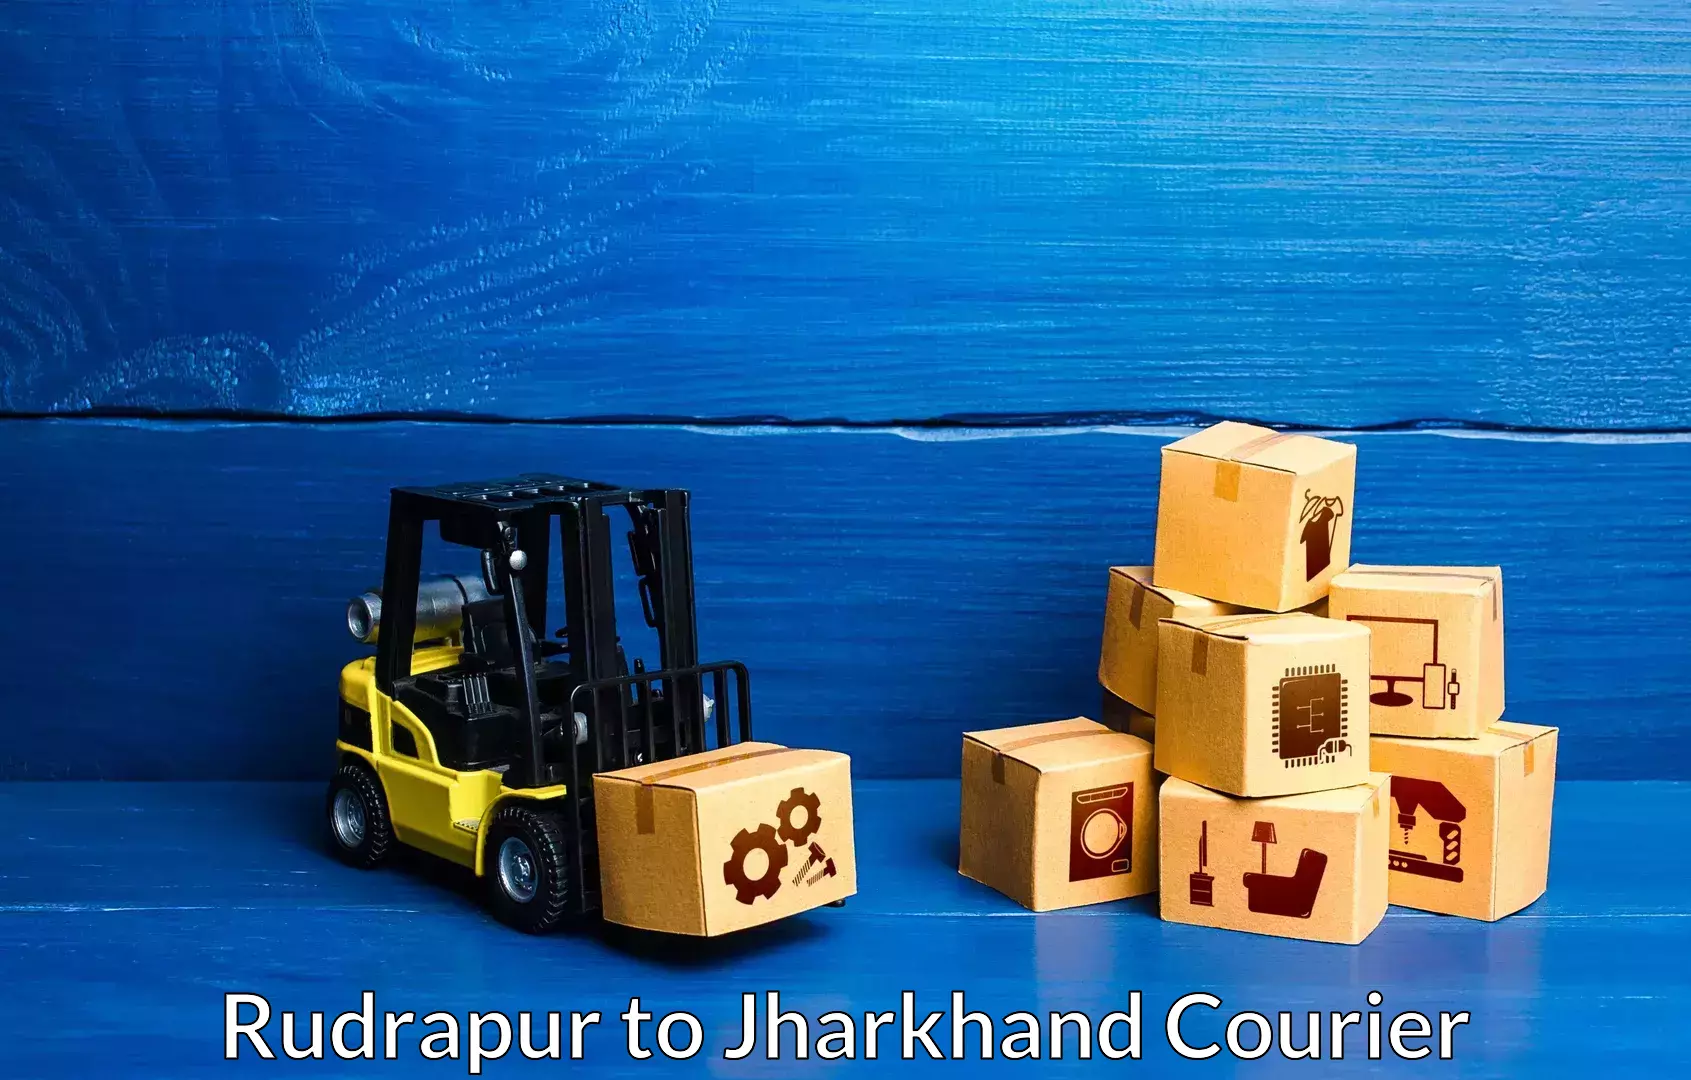 Furniture transport professionals Rudrapur to Jharkhand